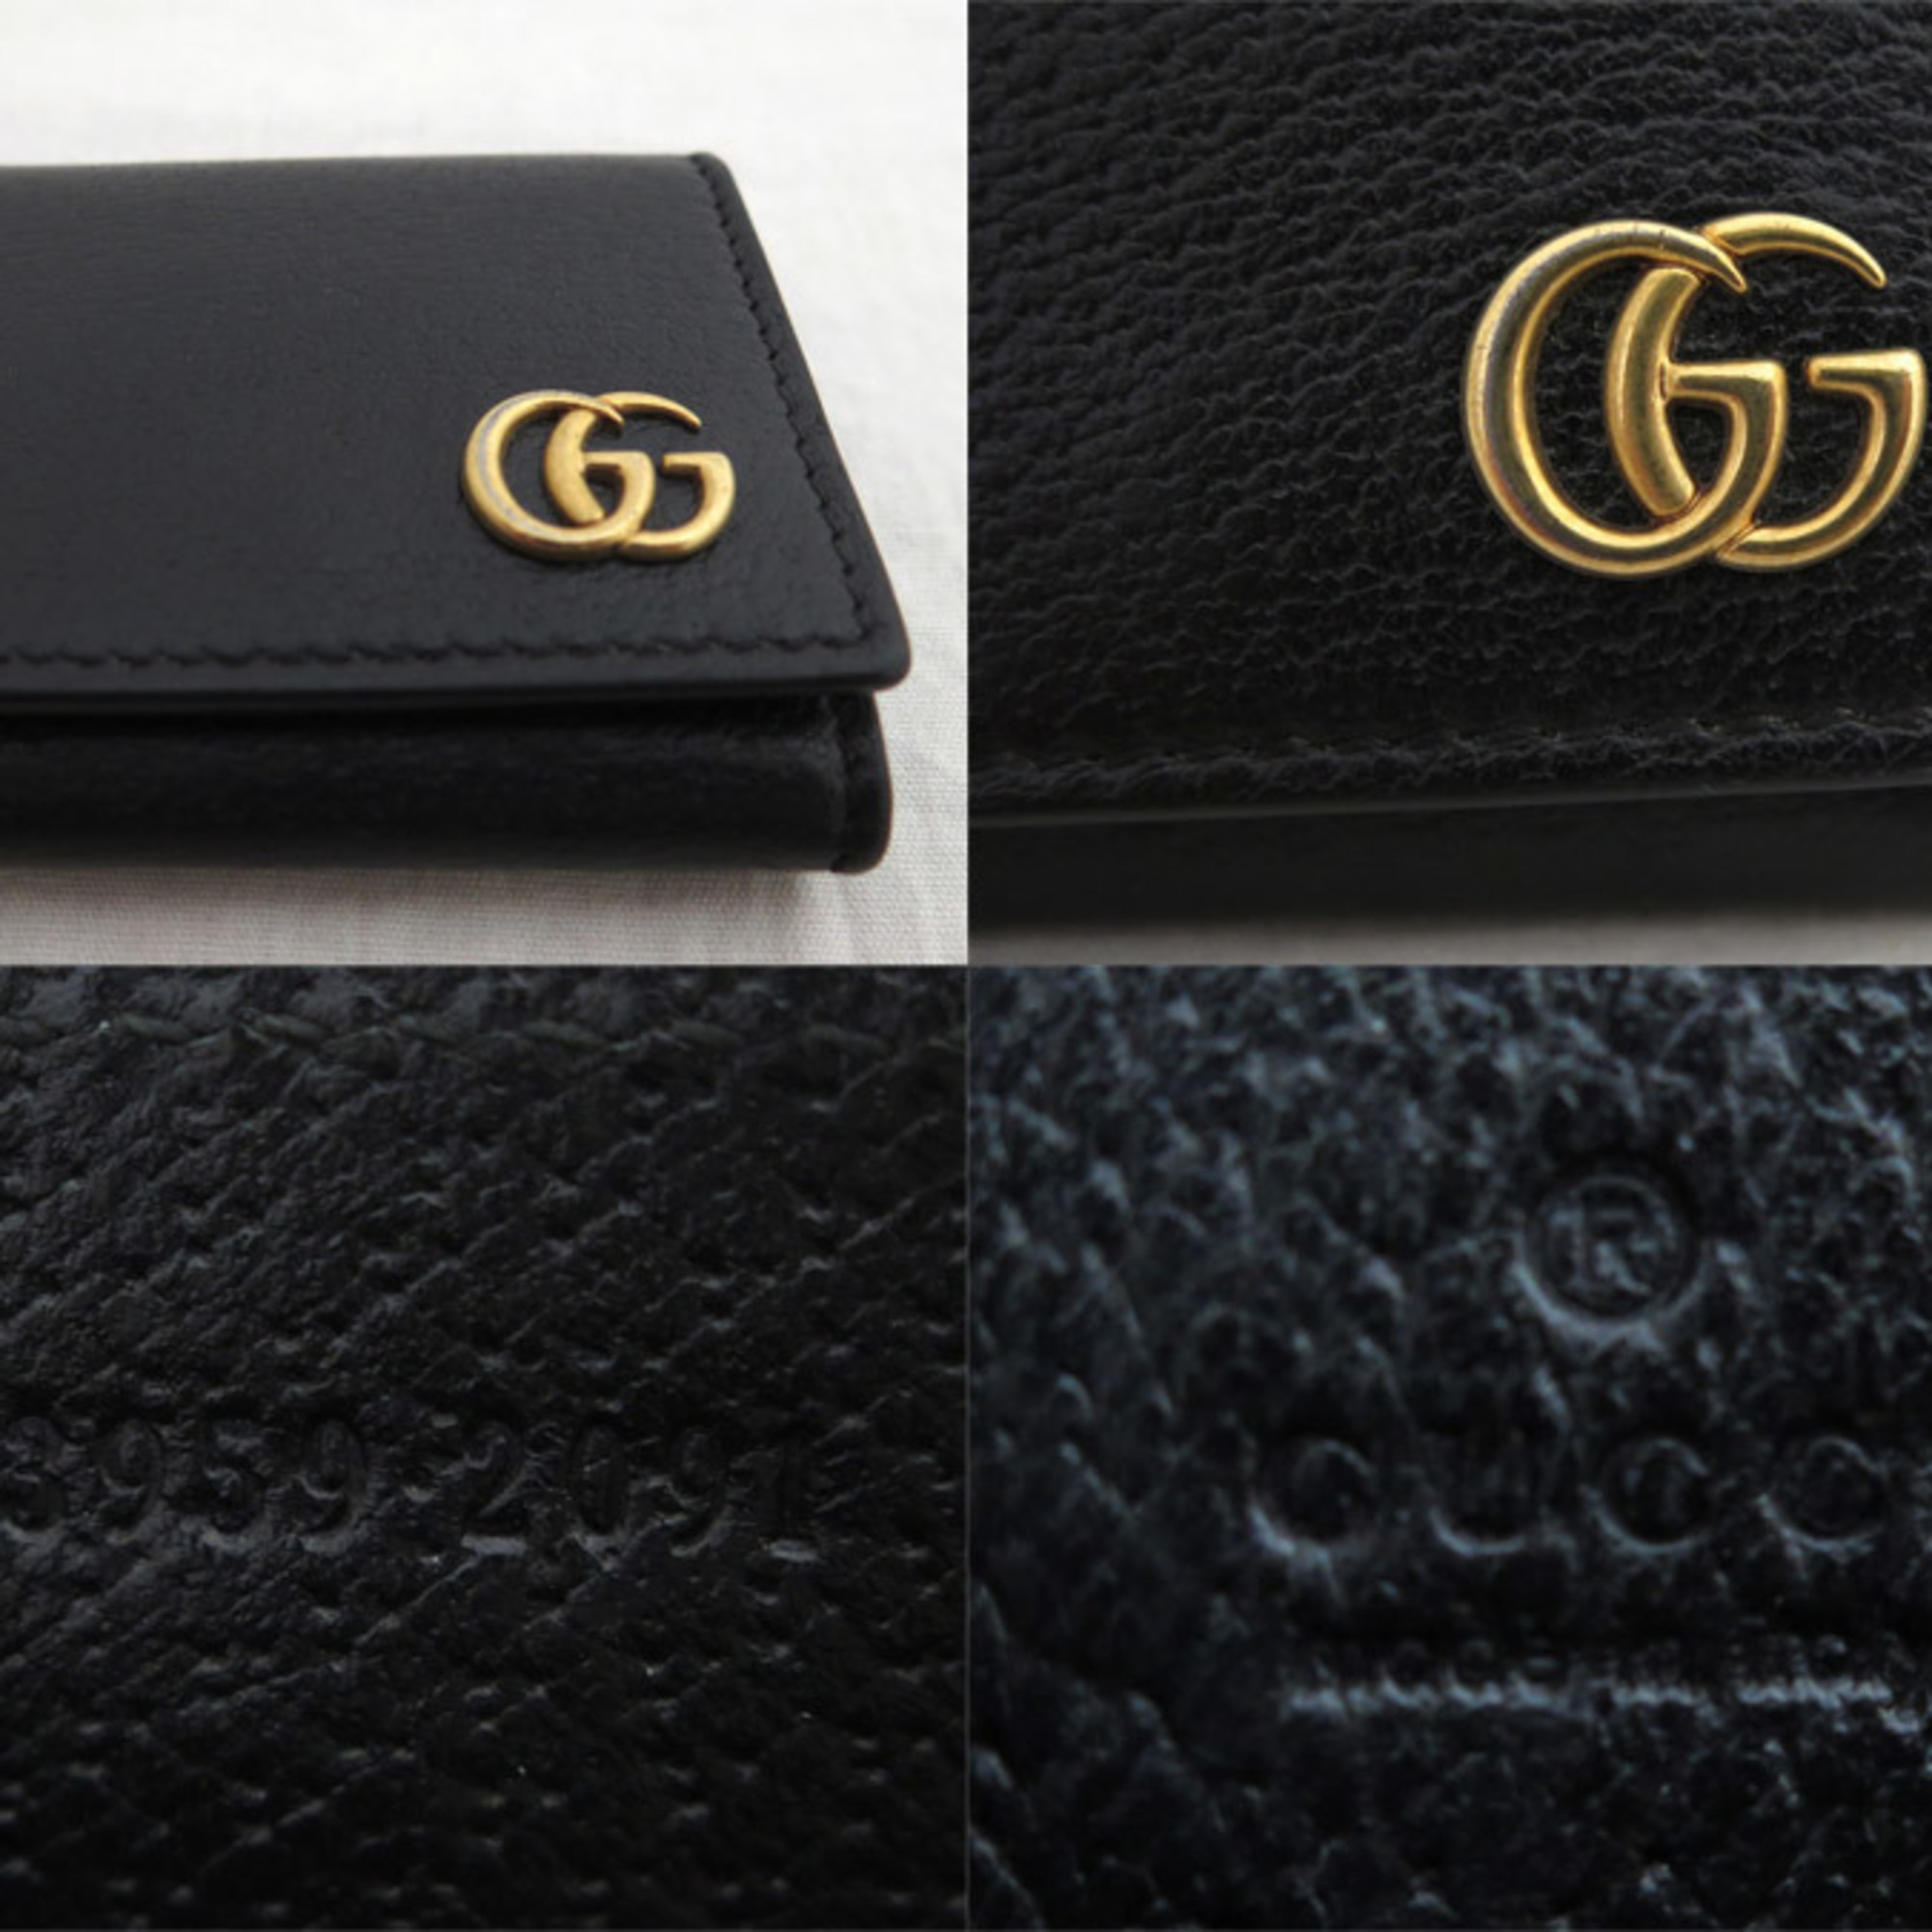 Gucci GUCCI coin case wallet GG Marmont leather/metal black x gold unisex 473959